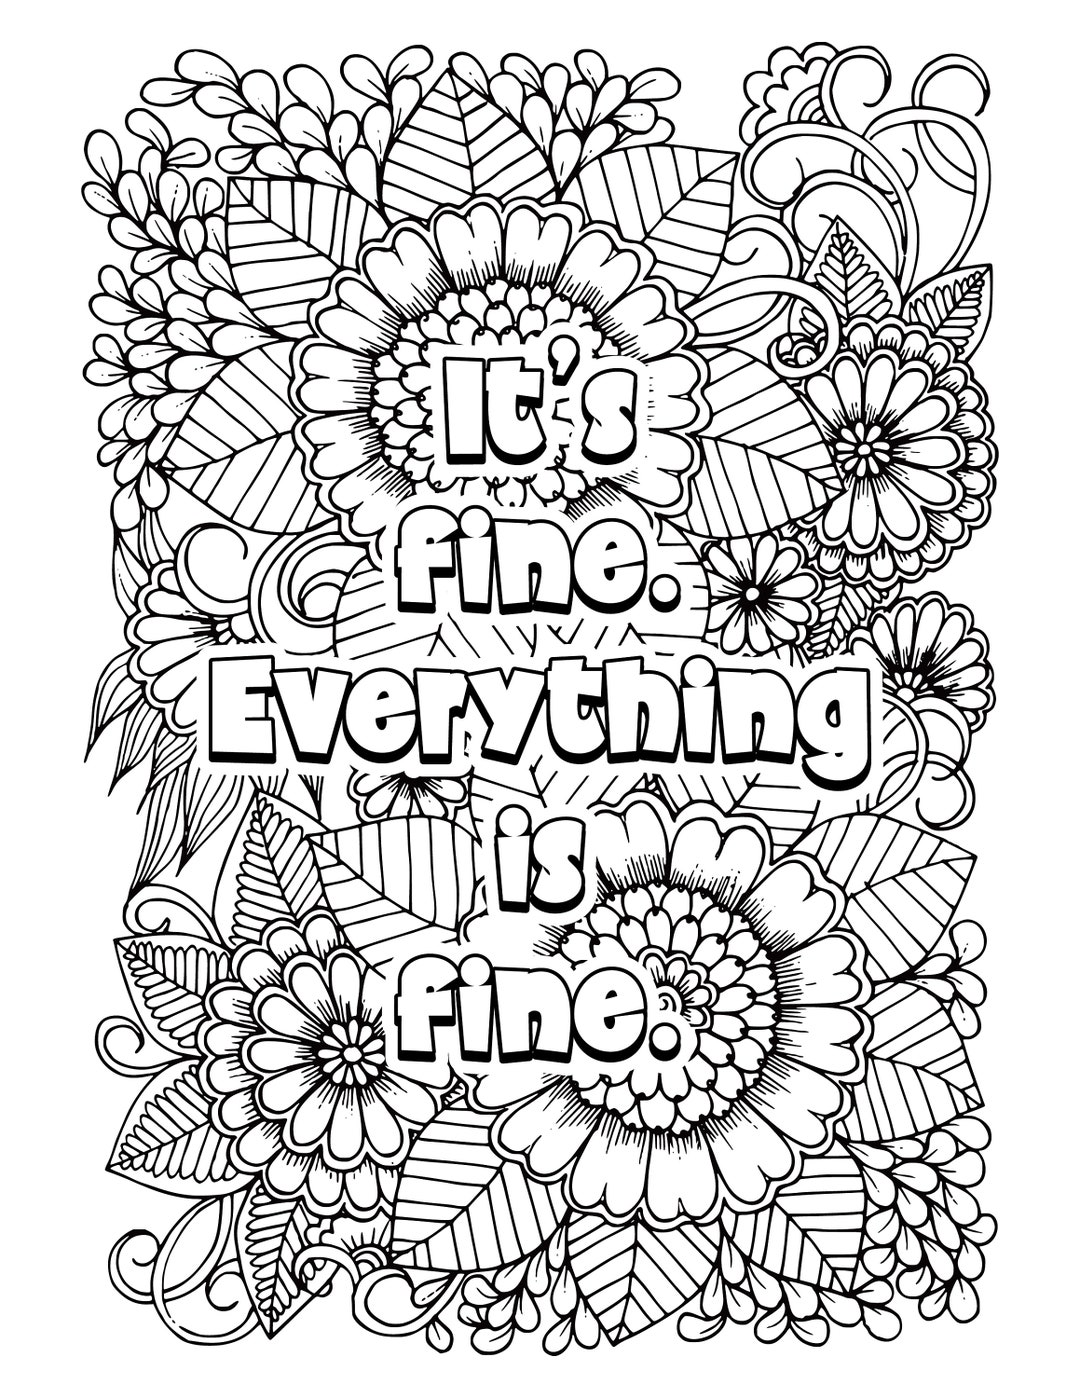 Adult Coloring Pages, Free Coloring Pages